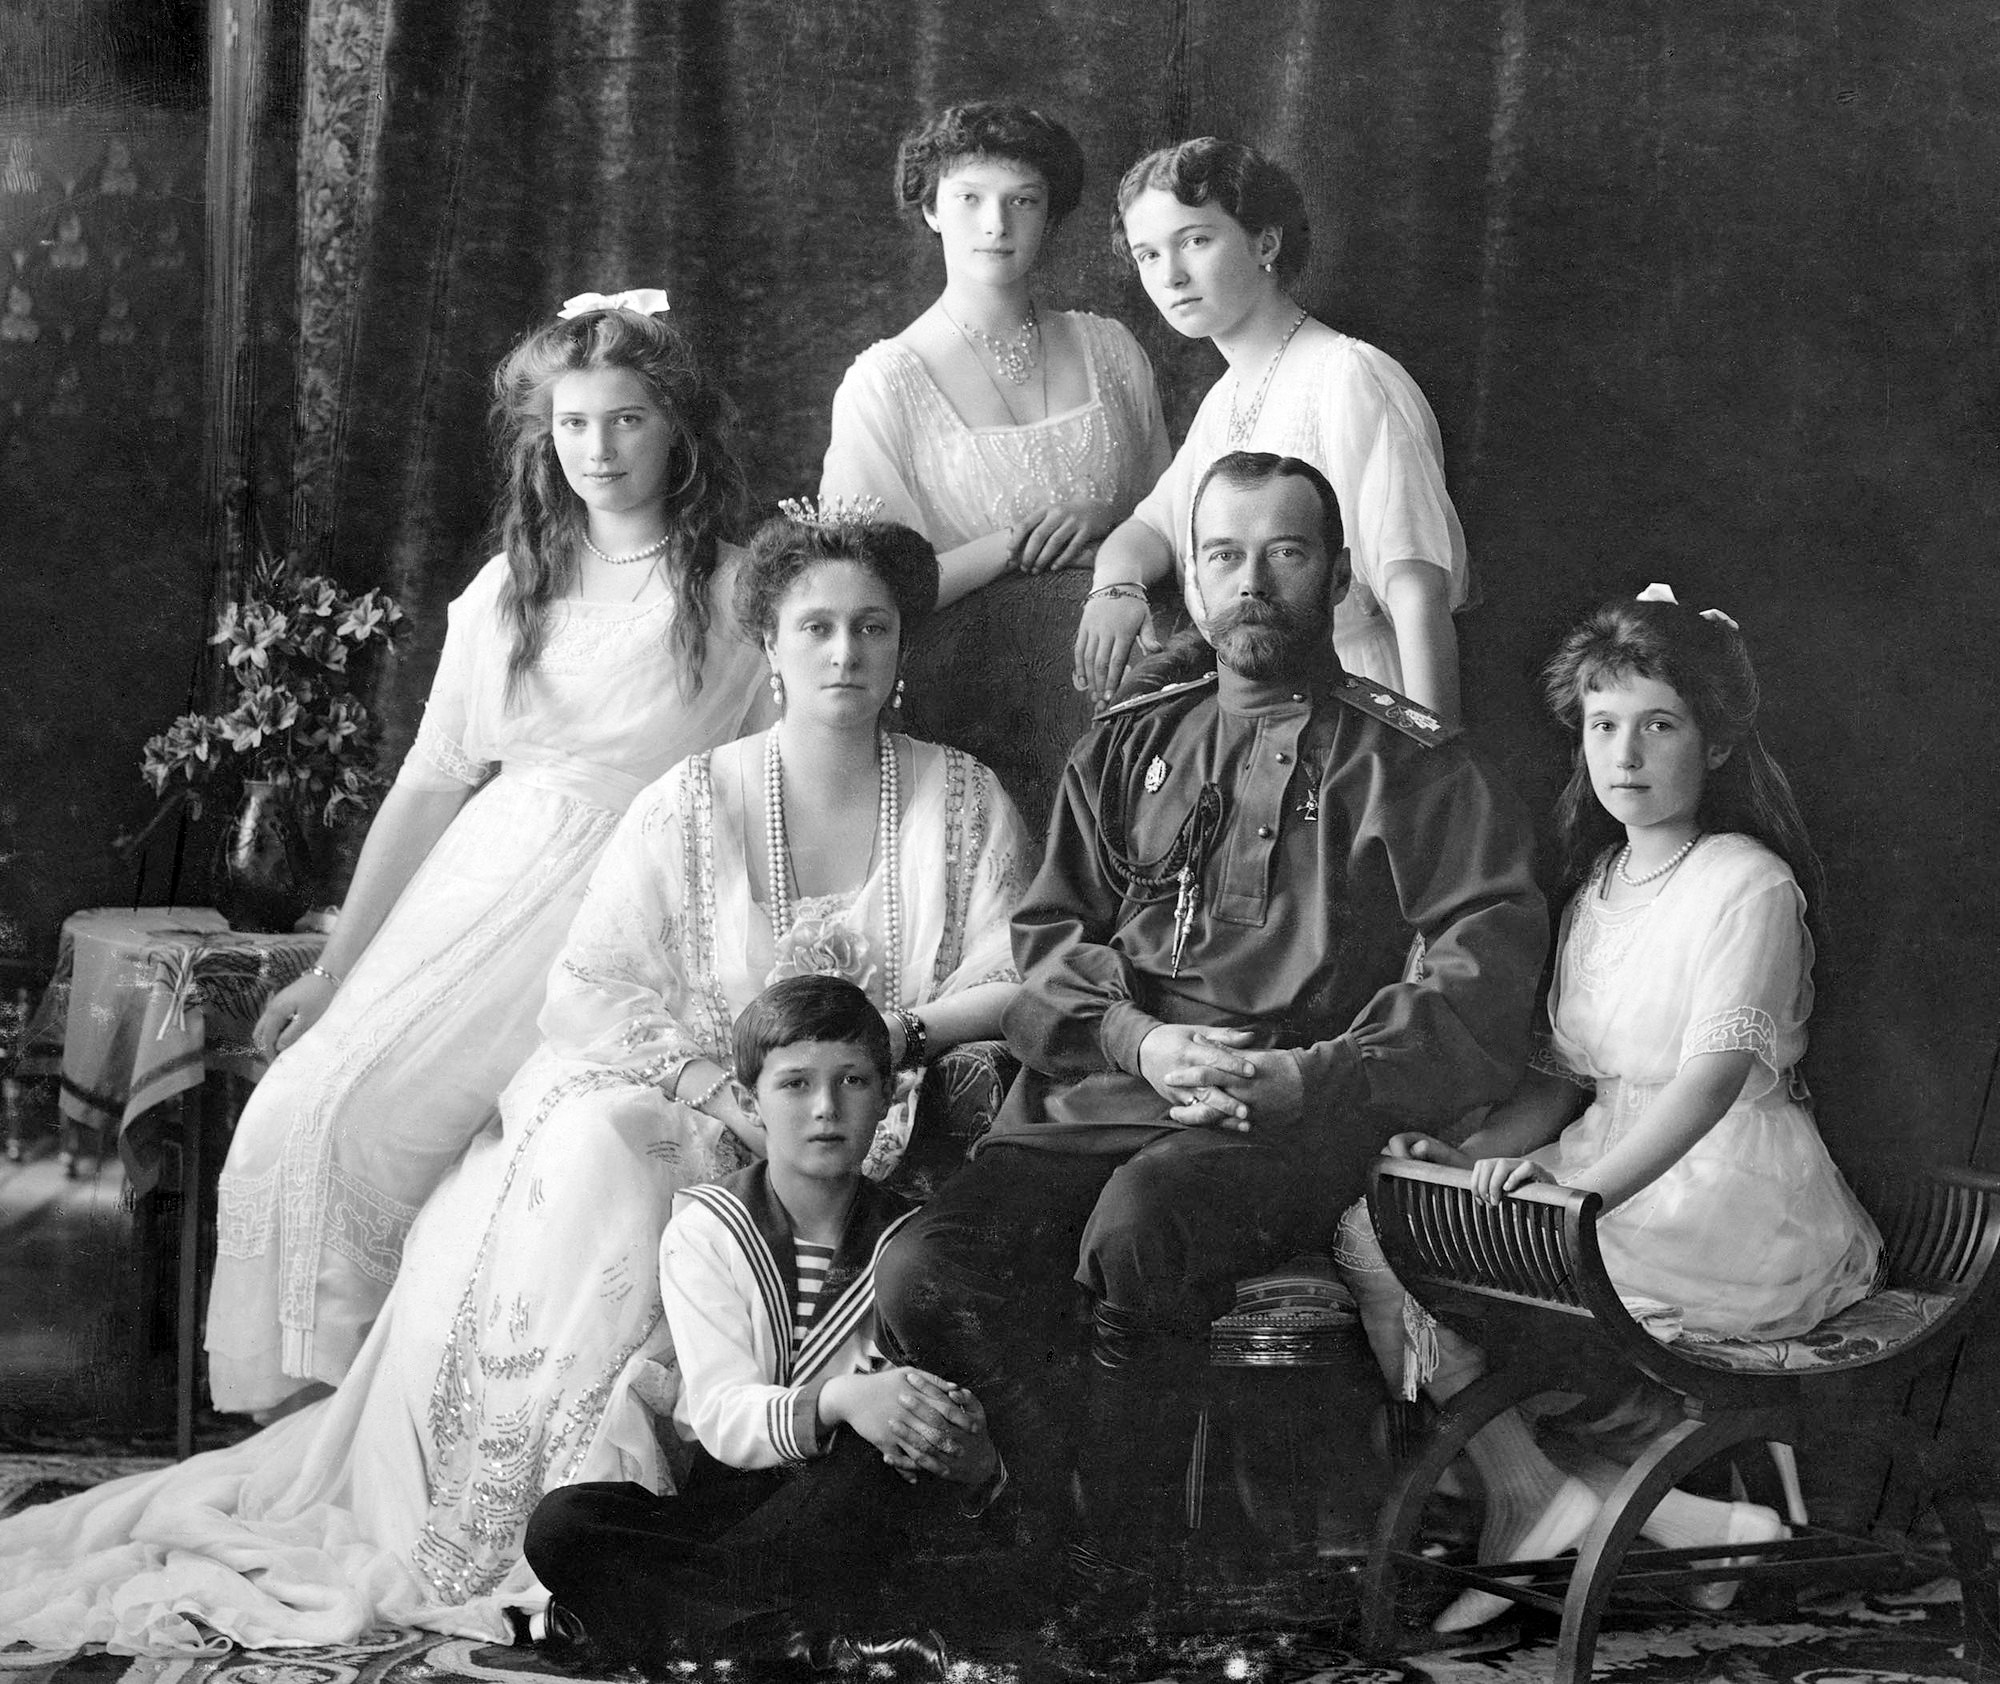 royal family of Tsar Nicholas II Photograph of the Russian Imperial Family, 1913